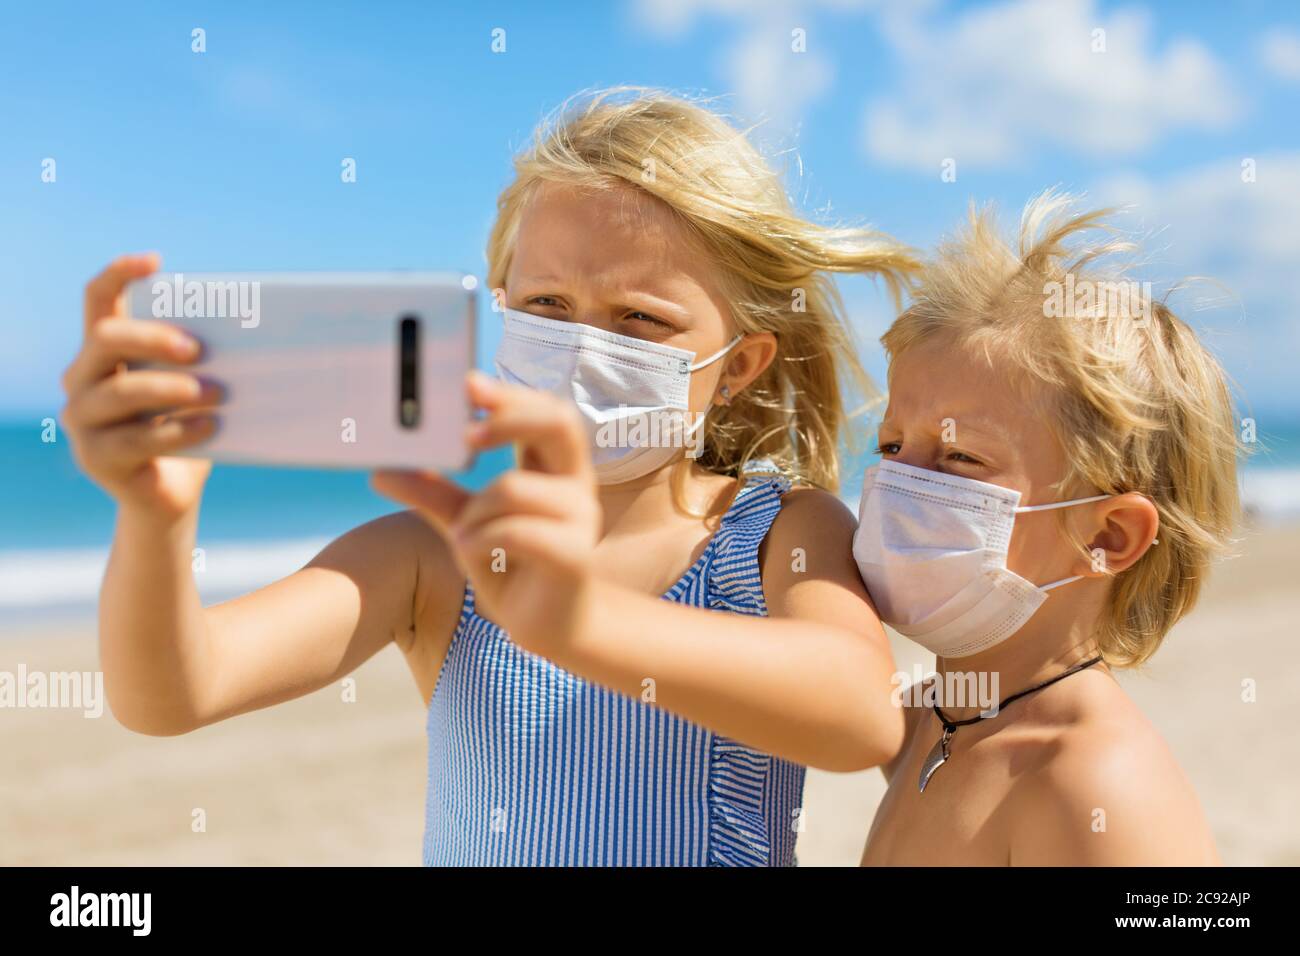 Funny kids taking selfie photo by smartphone on tropical sea beach. New rules to wear cloth face covering mask at public places due coronavirus COVID Stock Photo